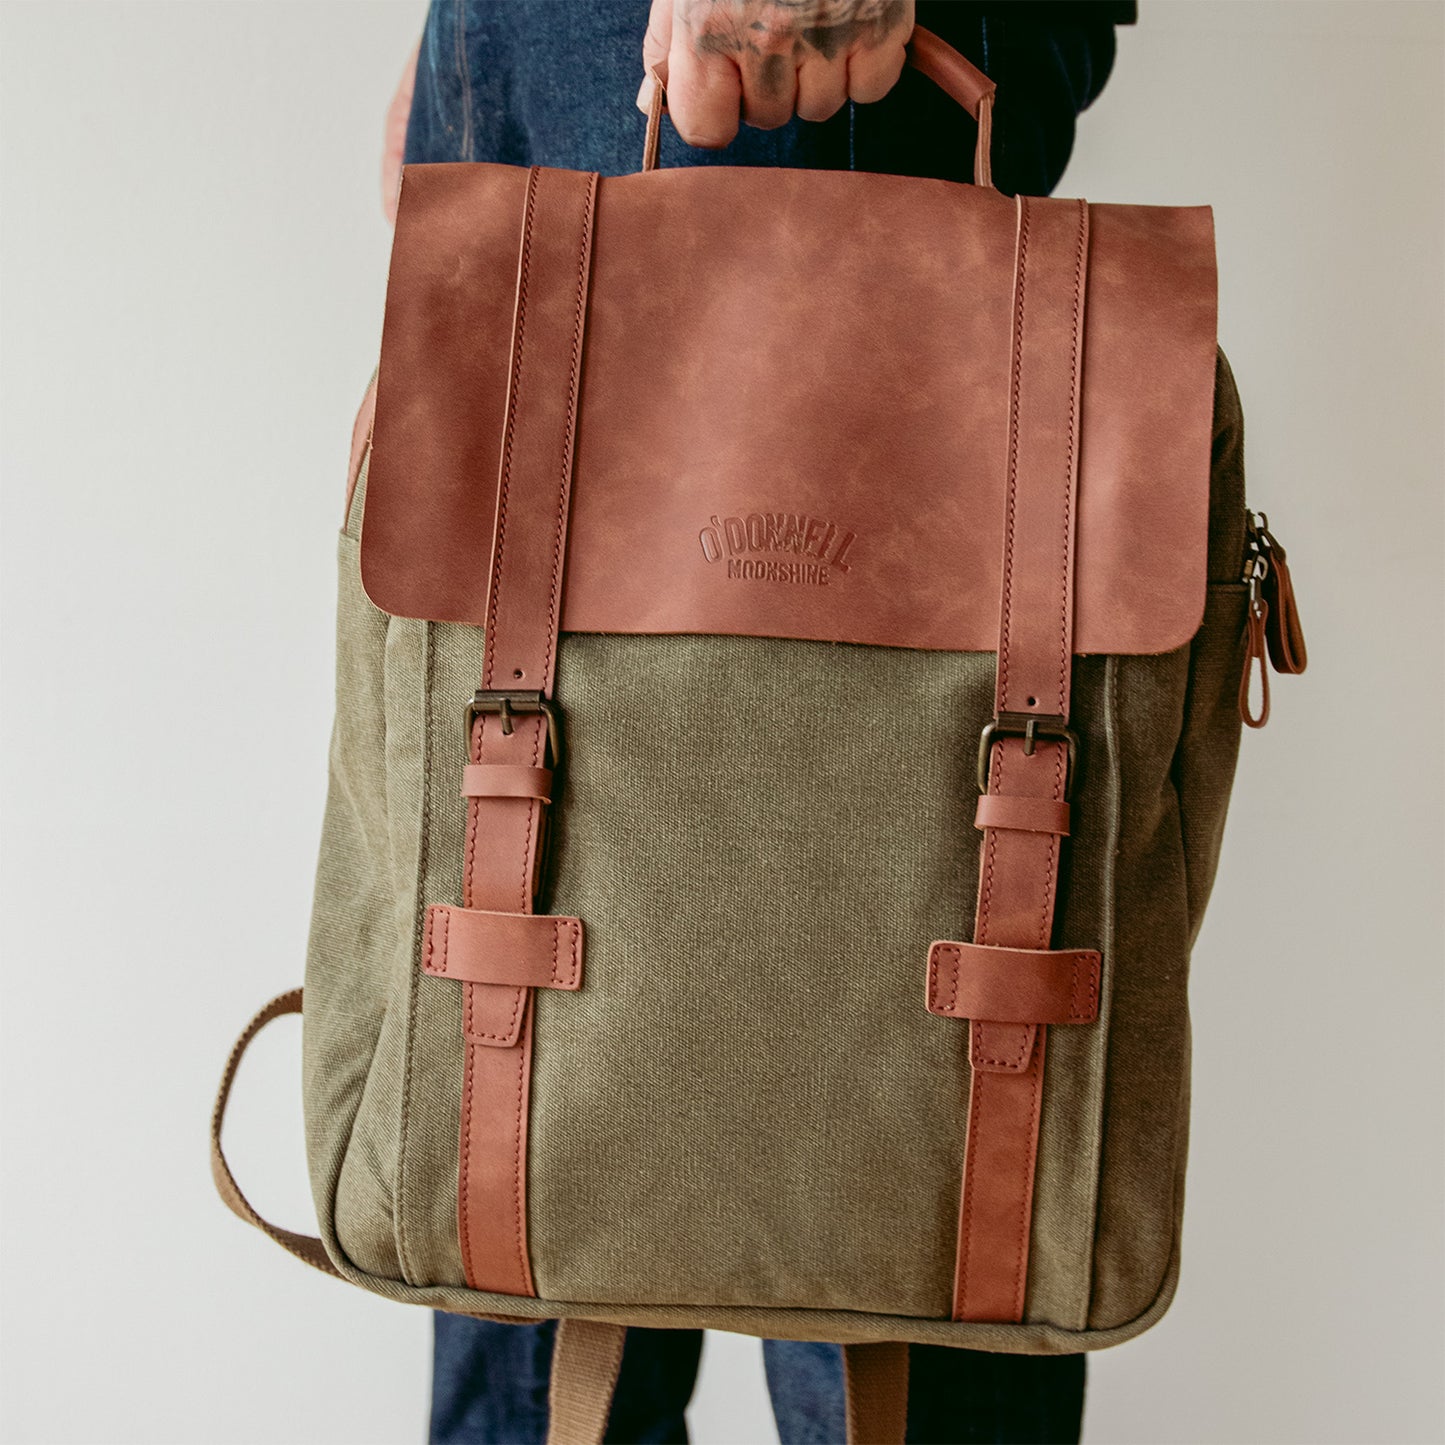 O’Donnell Backpack